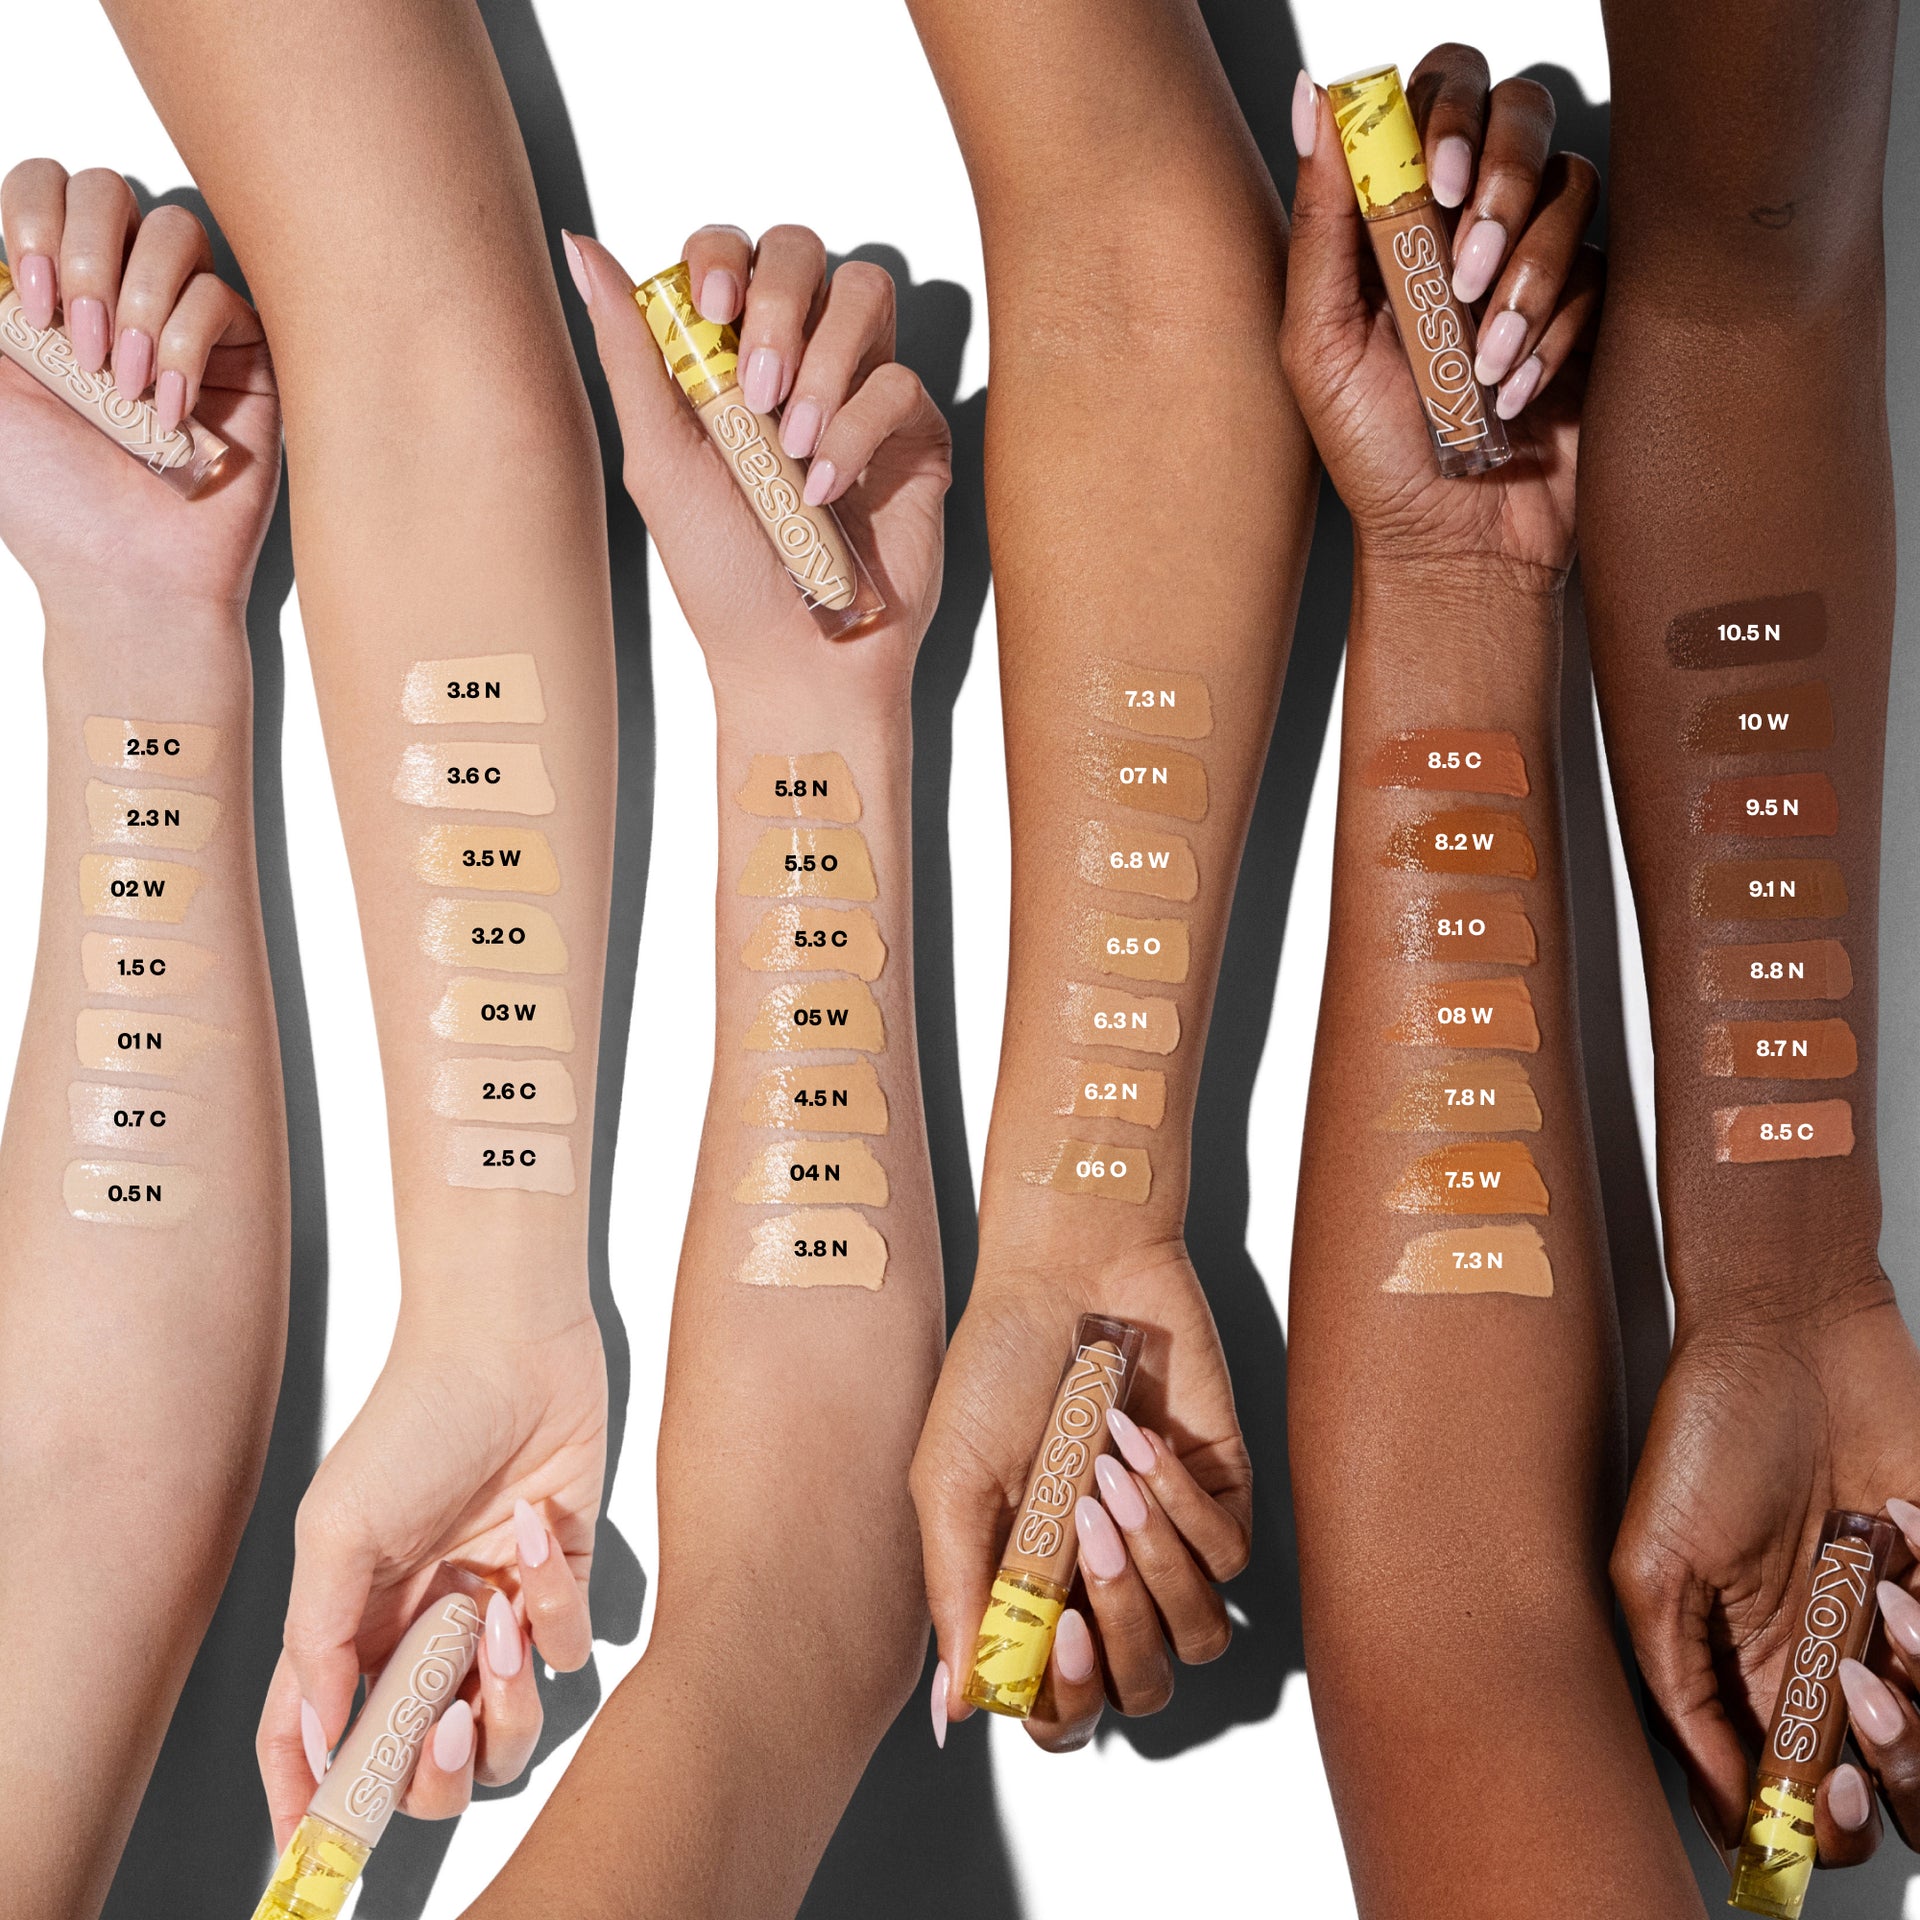 Arm swatches of all shades on different skin tones